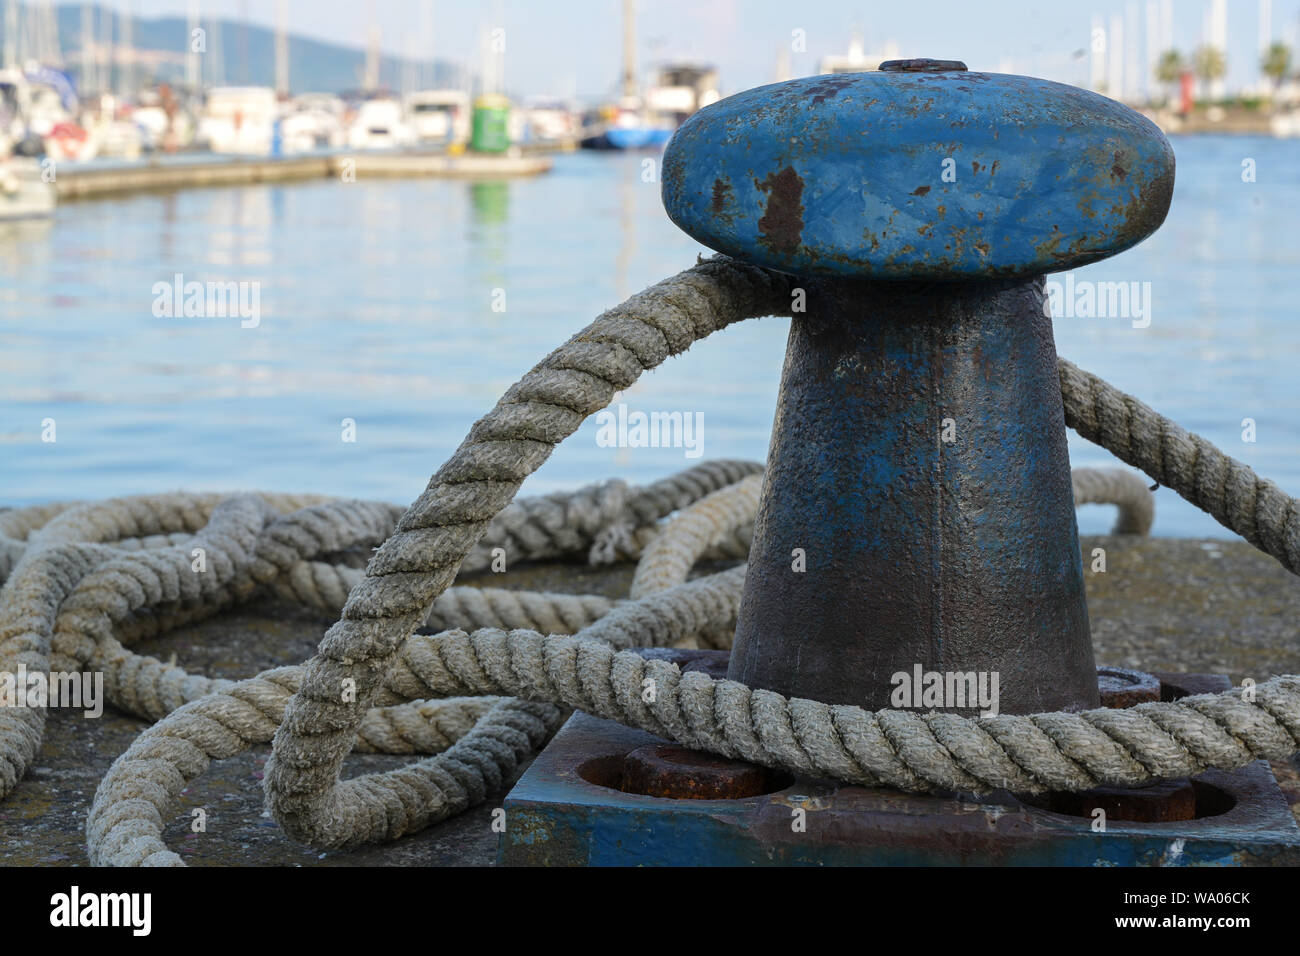 https://c8.alamy.com/comp/WA06CK/bollard-from-iron-with-a-ship-rope-at-the-pier-on-the-port-selected-focus-narrow-depth-of-field-WA06CK.jpg